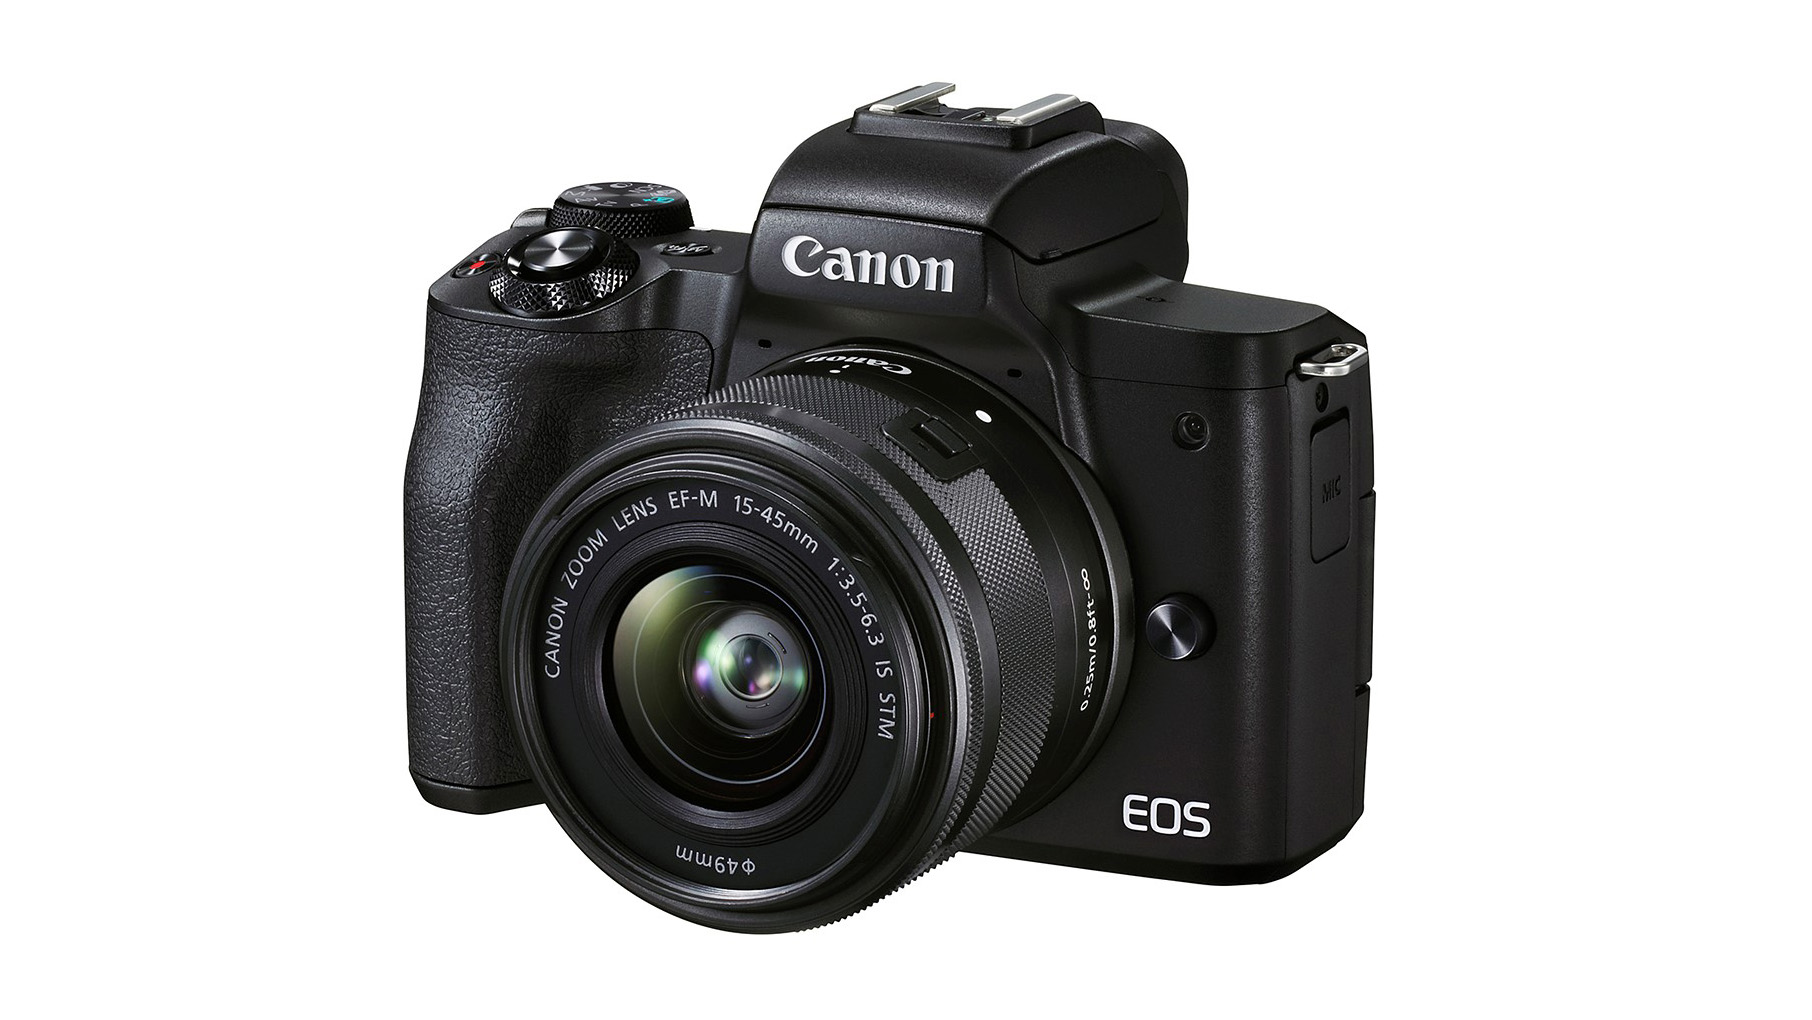 Best camera for beginners: Canon EOS M50 Mark II